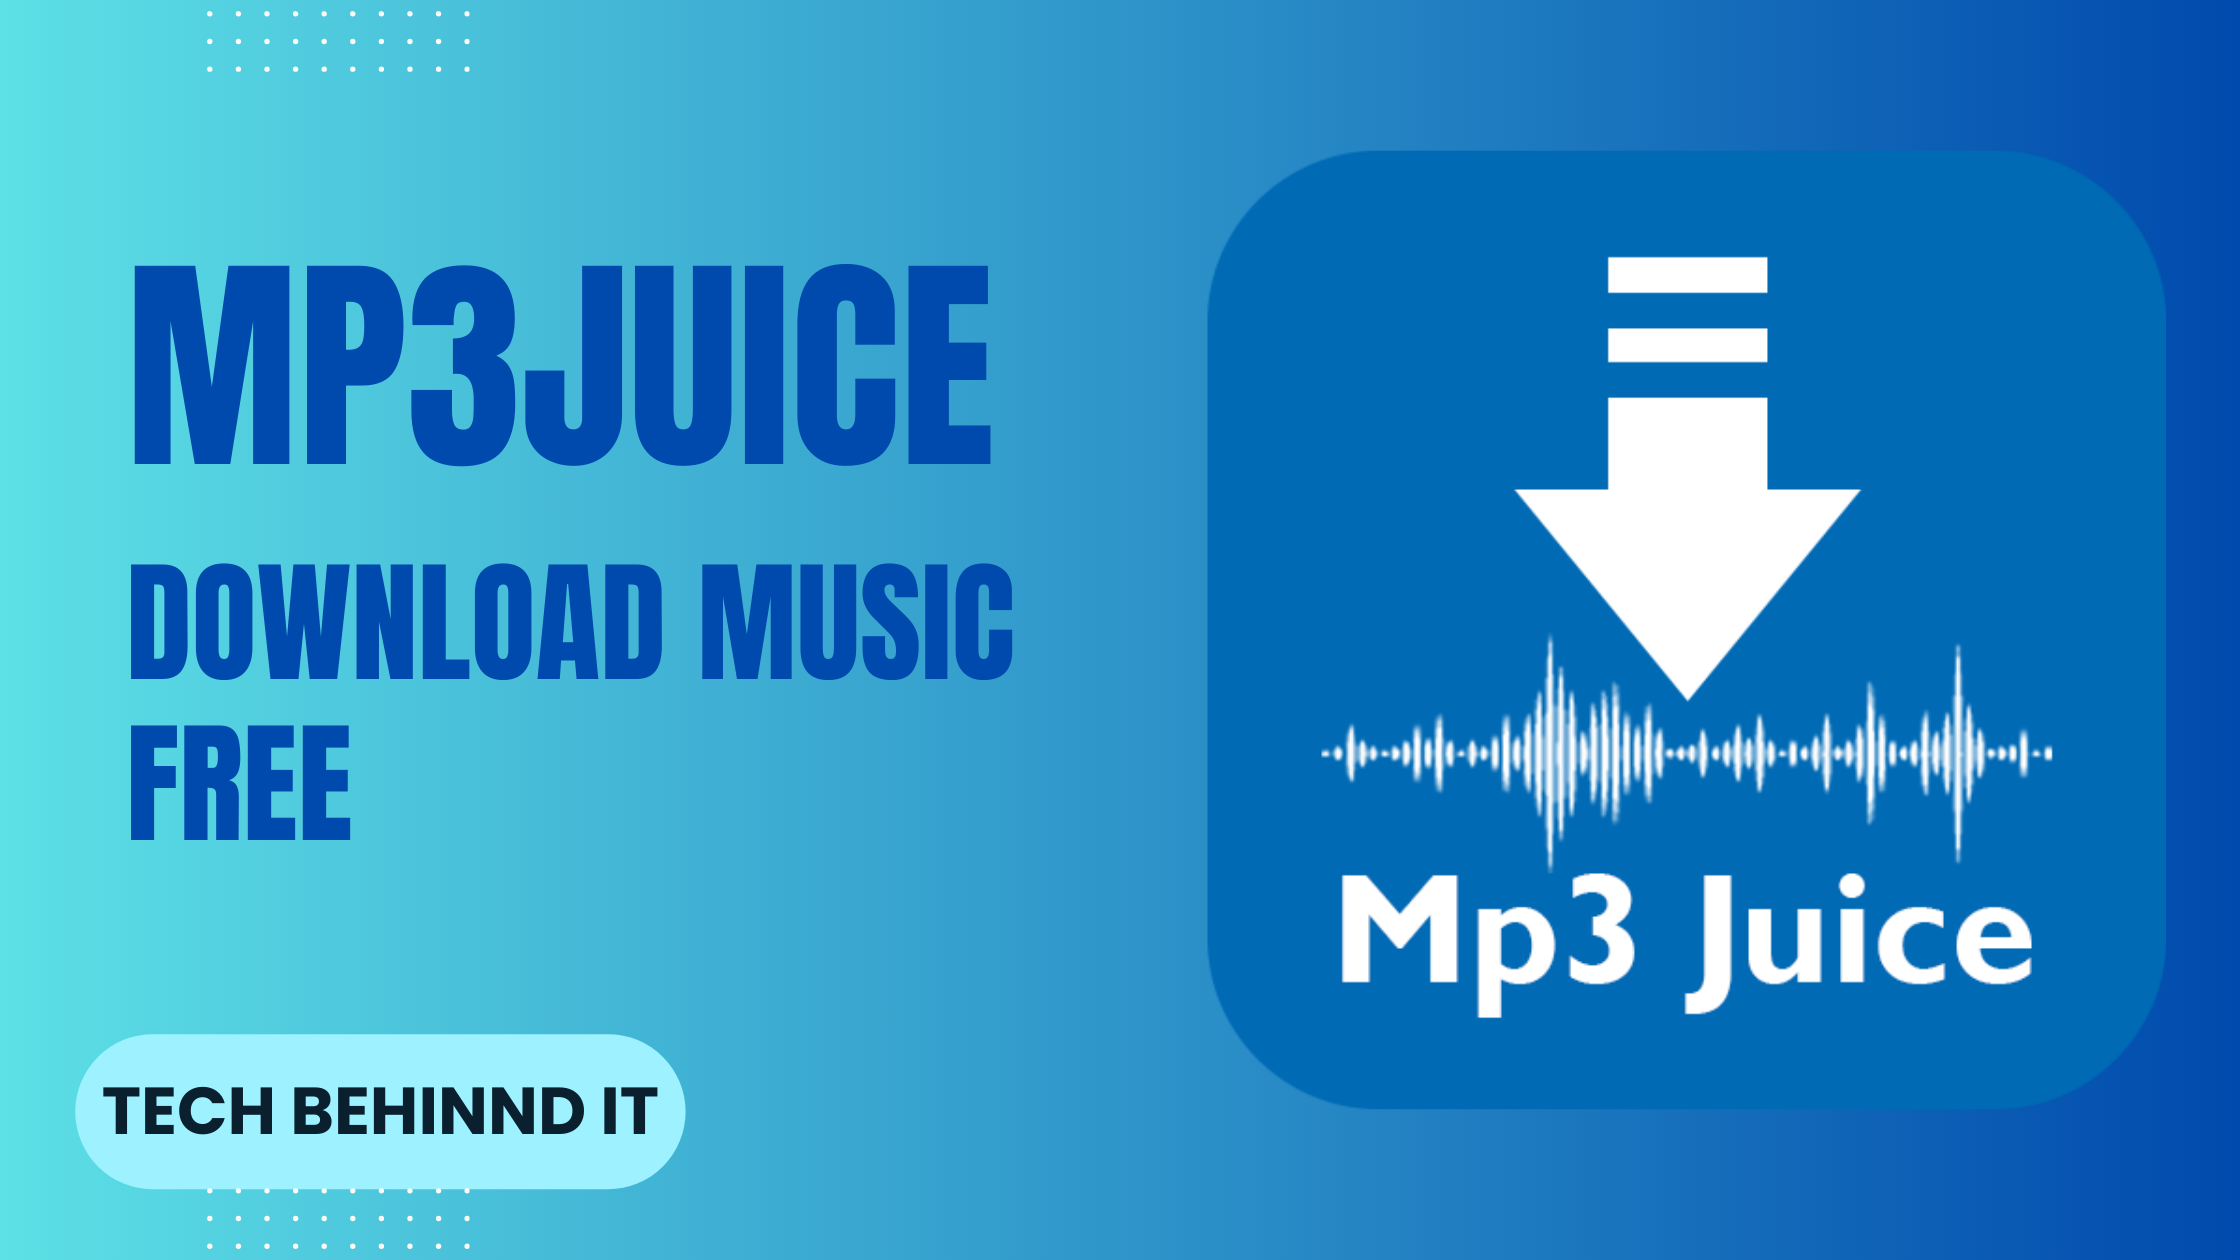 Get Mp3Juice And Enjoy Free Music Downloads on Your iPhone!